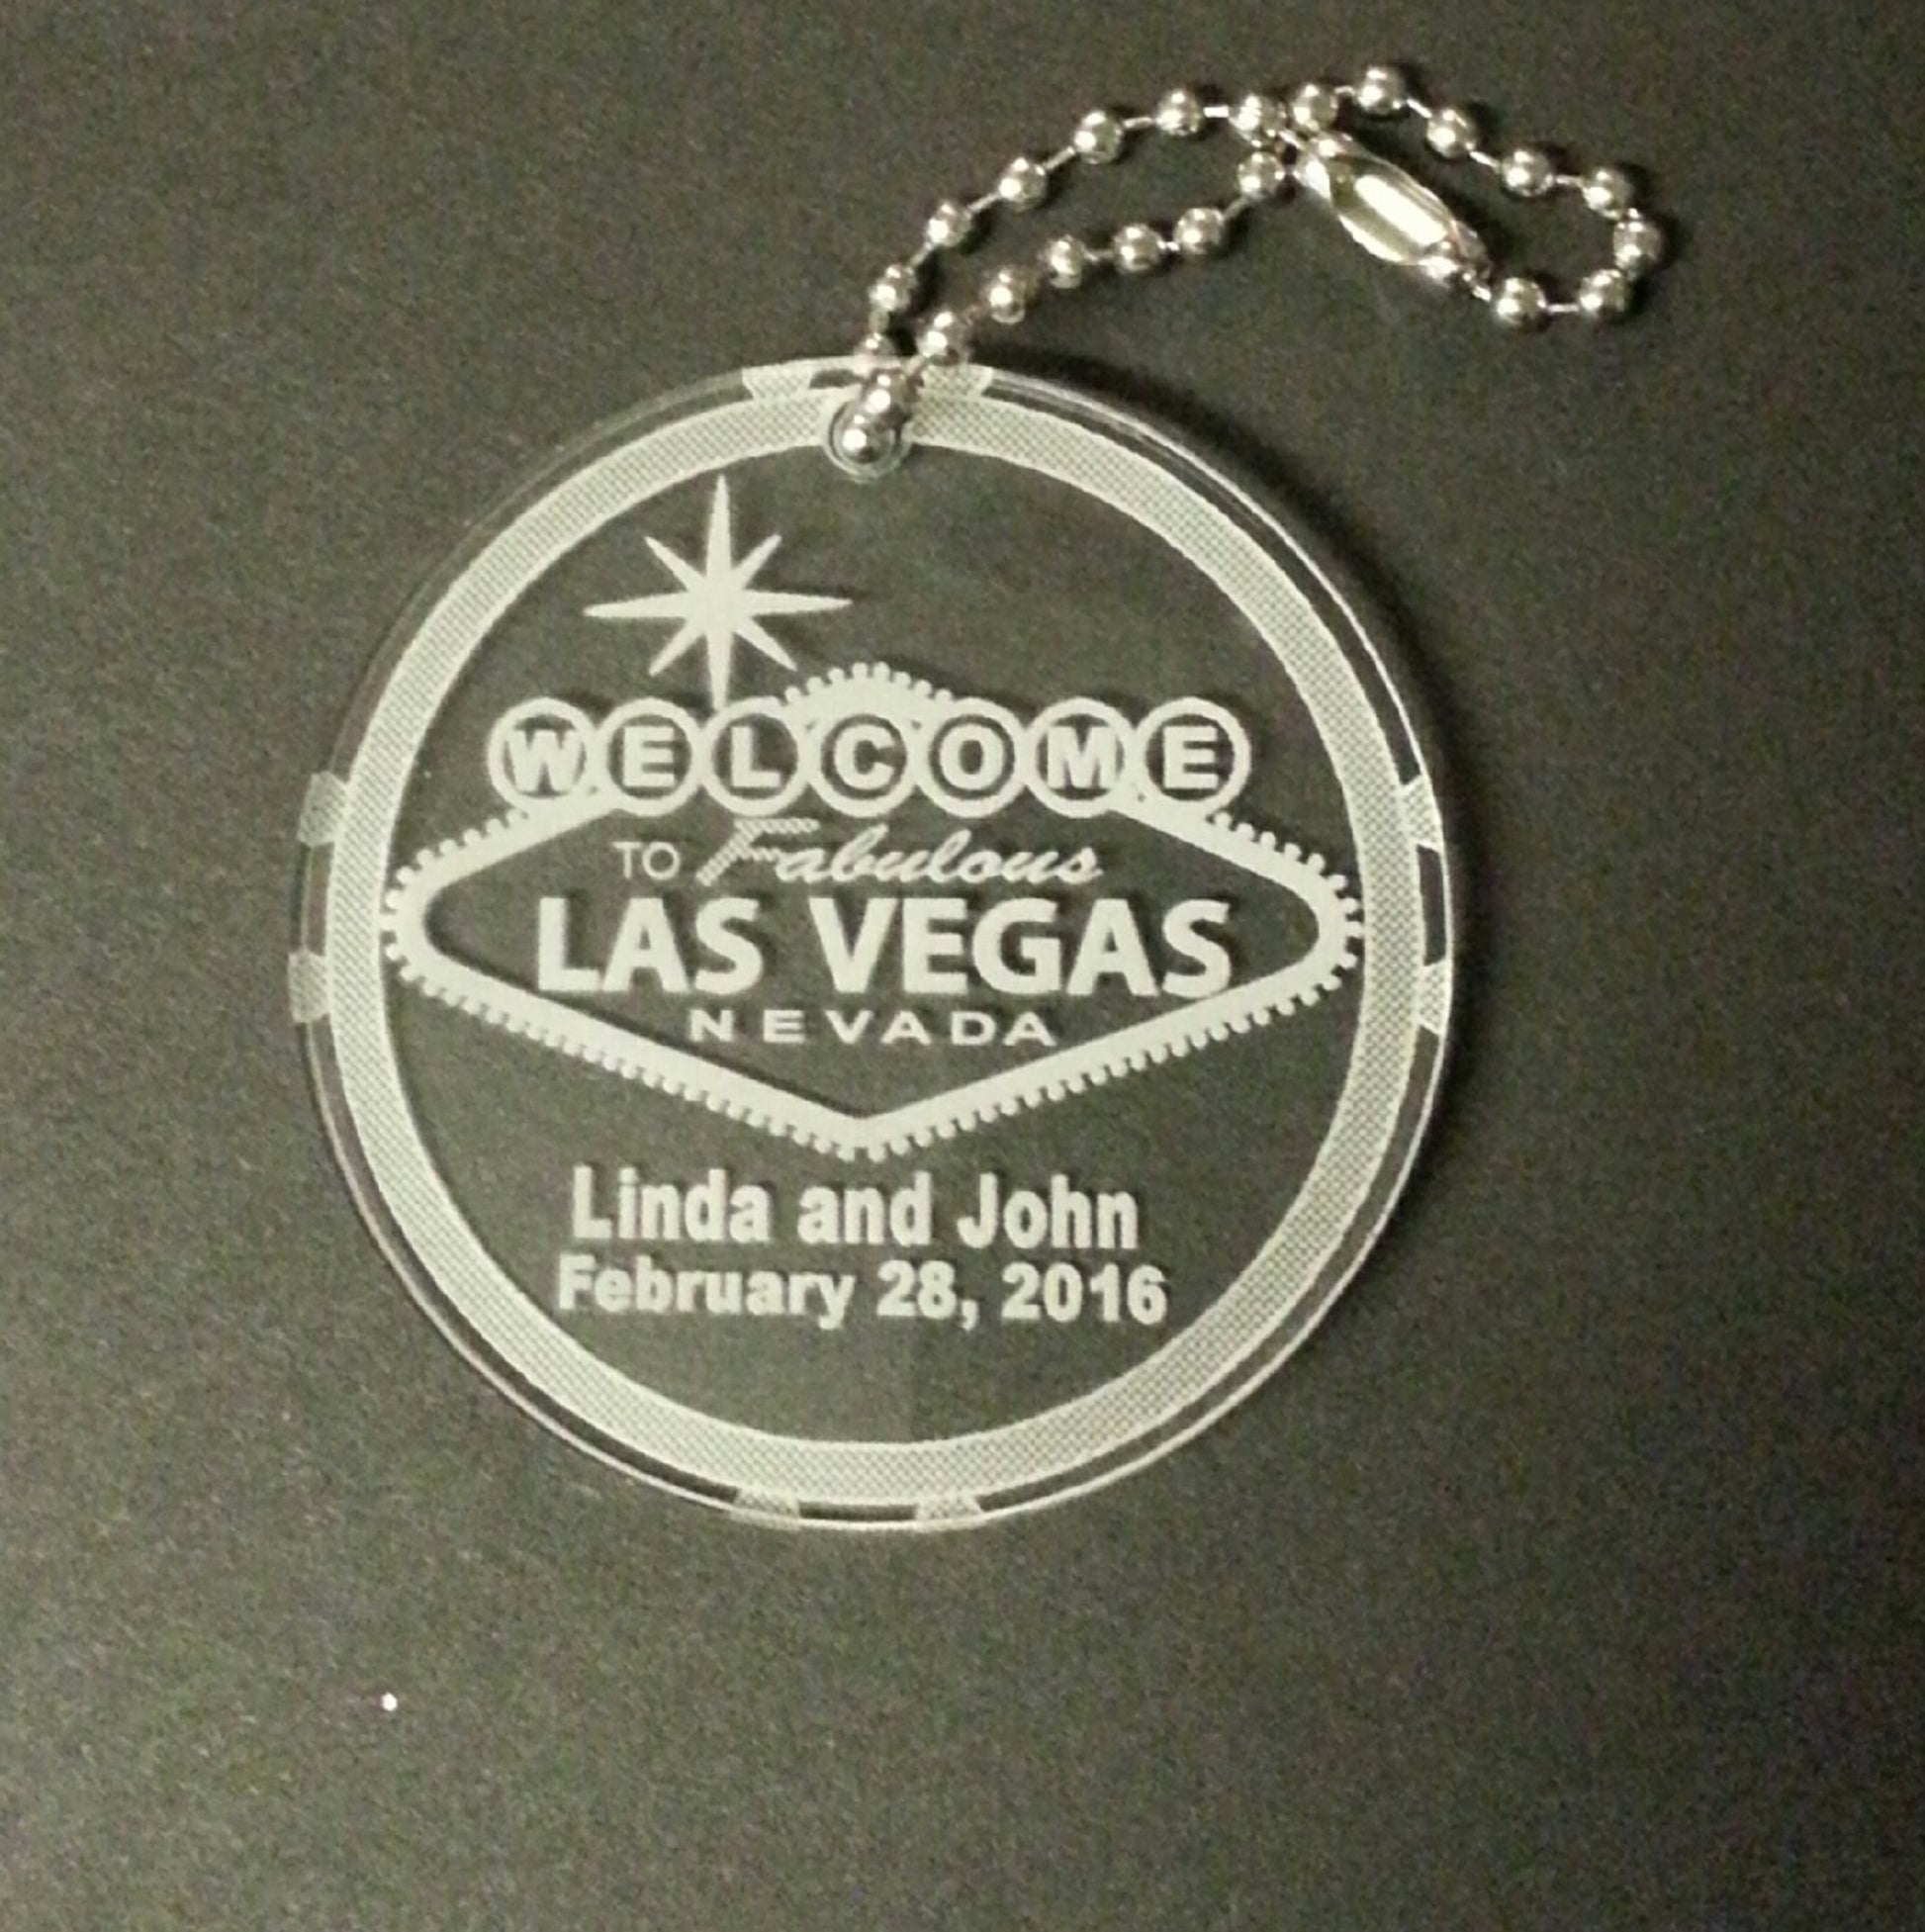 FinesseLaserDesigns Qty 100 Personalized Married or Welcome to Las Vegas Wedding Acrylic Key Chain Favors Poker Chip